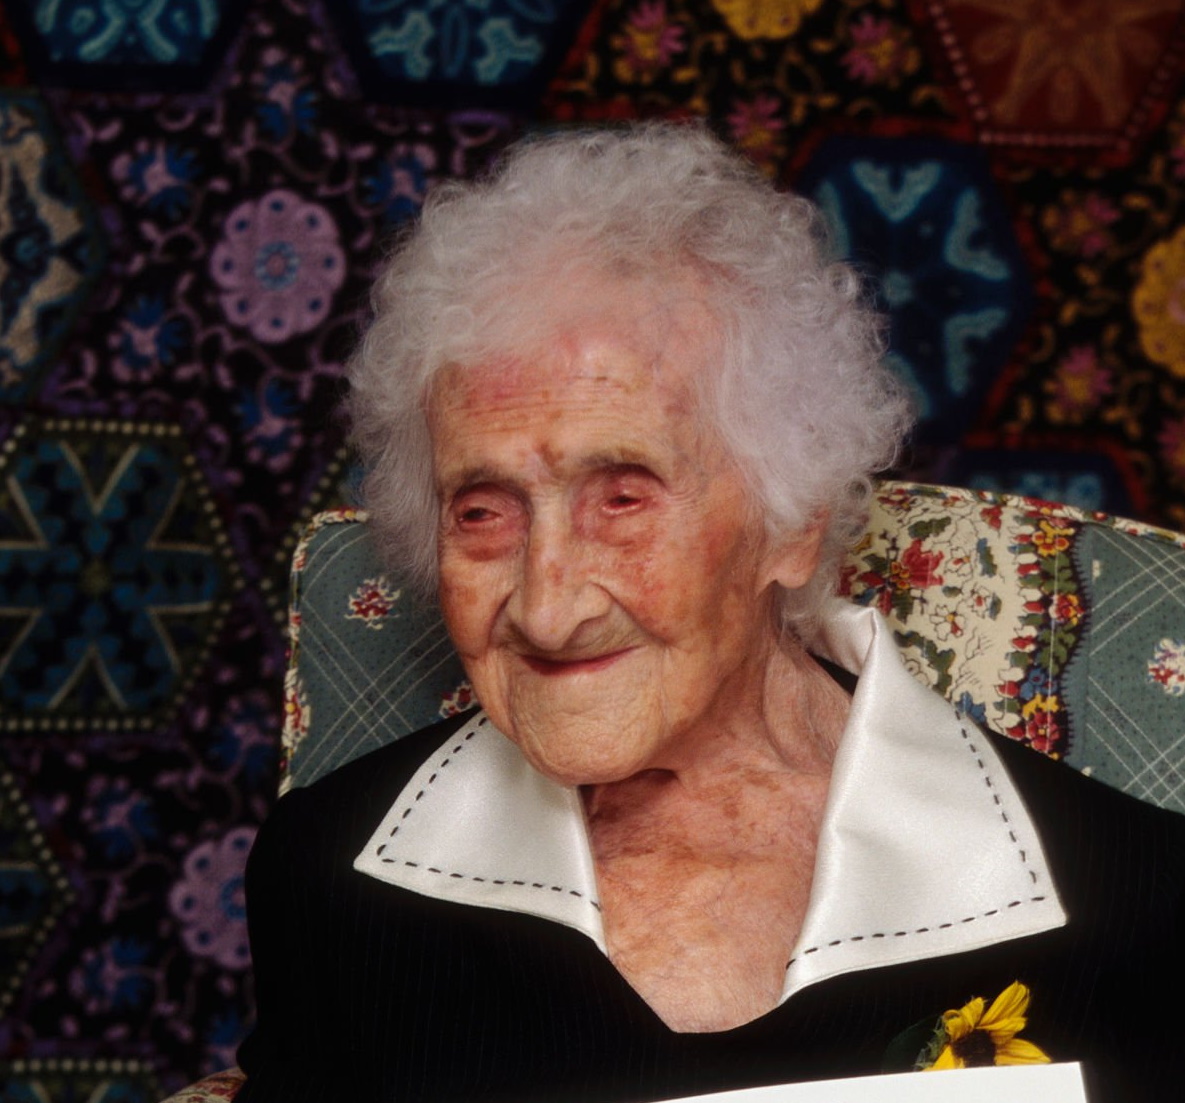 The oldest person ever: Will Jeanne Calment be the last titleholder?